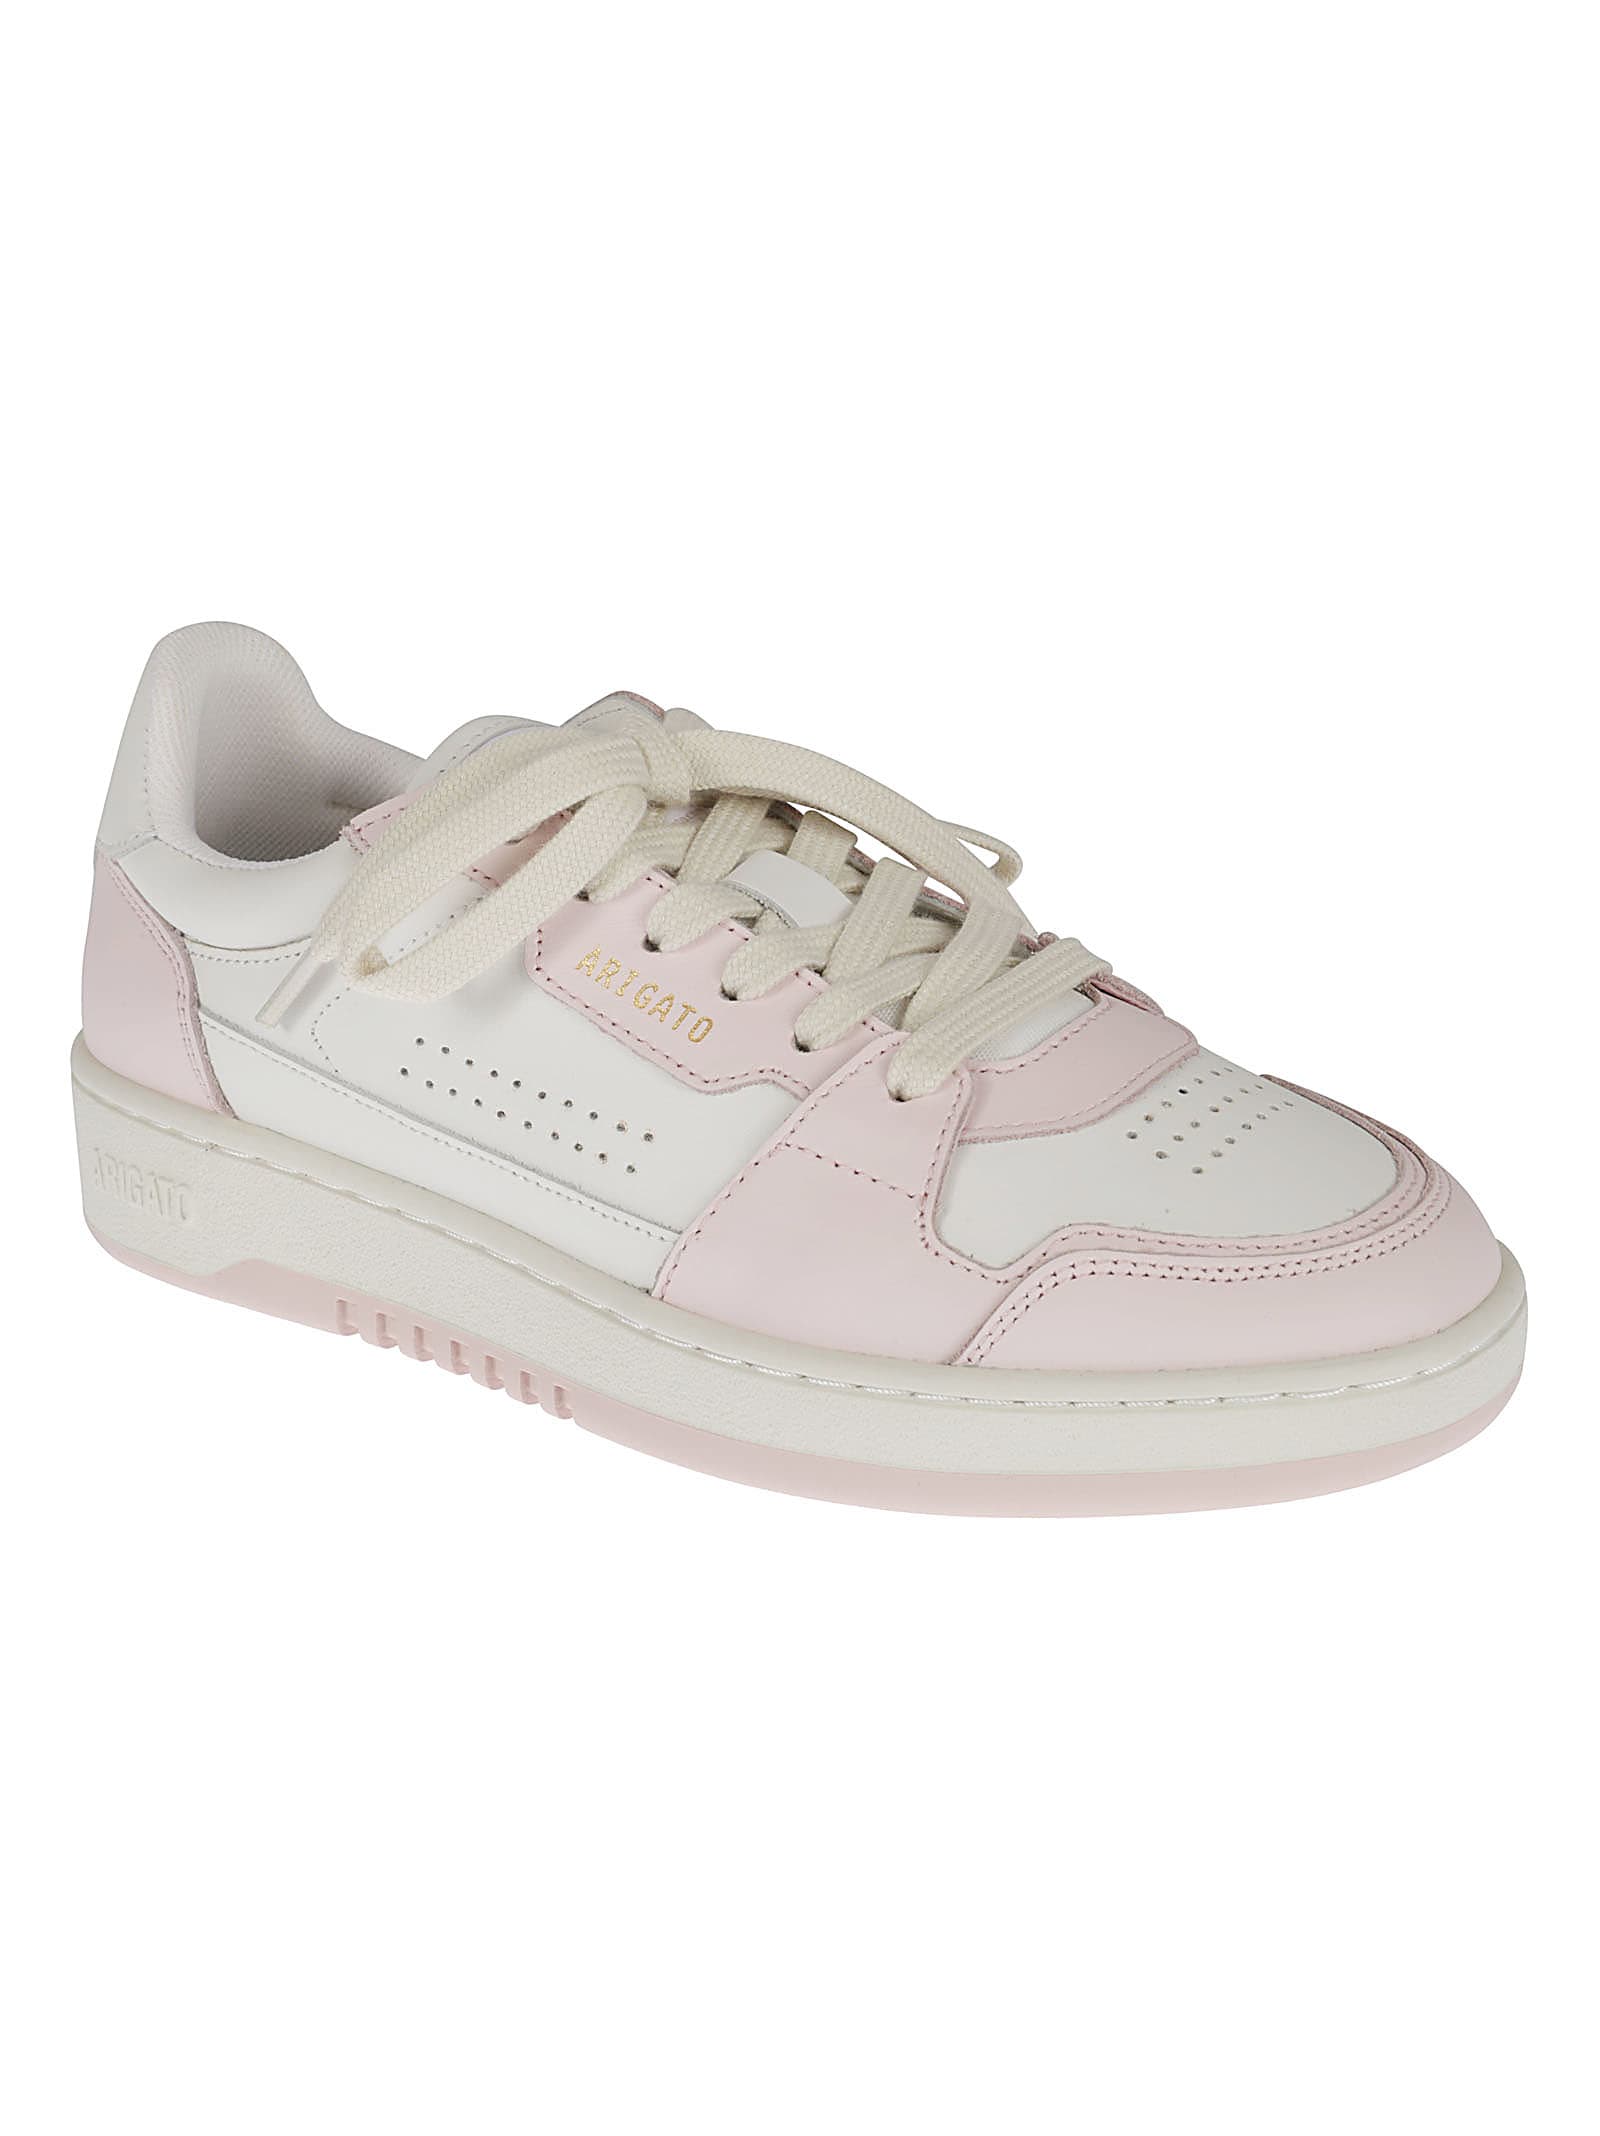 Shop Axel Arigato Dice Lo Sneakers In White/pink